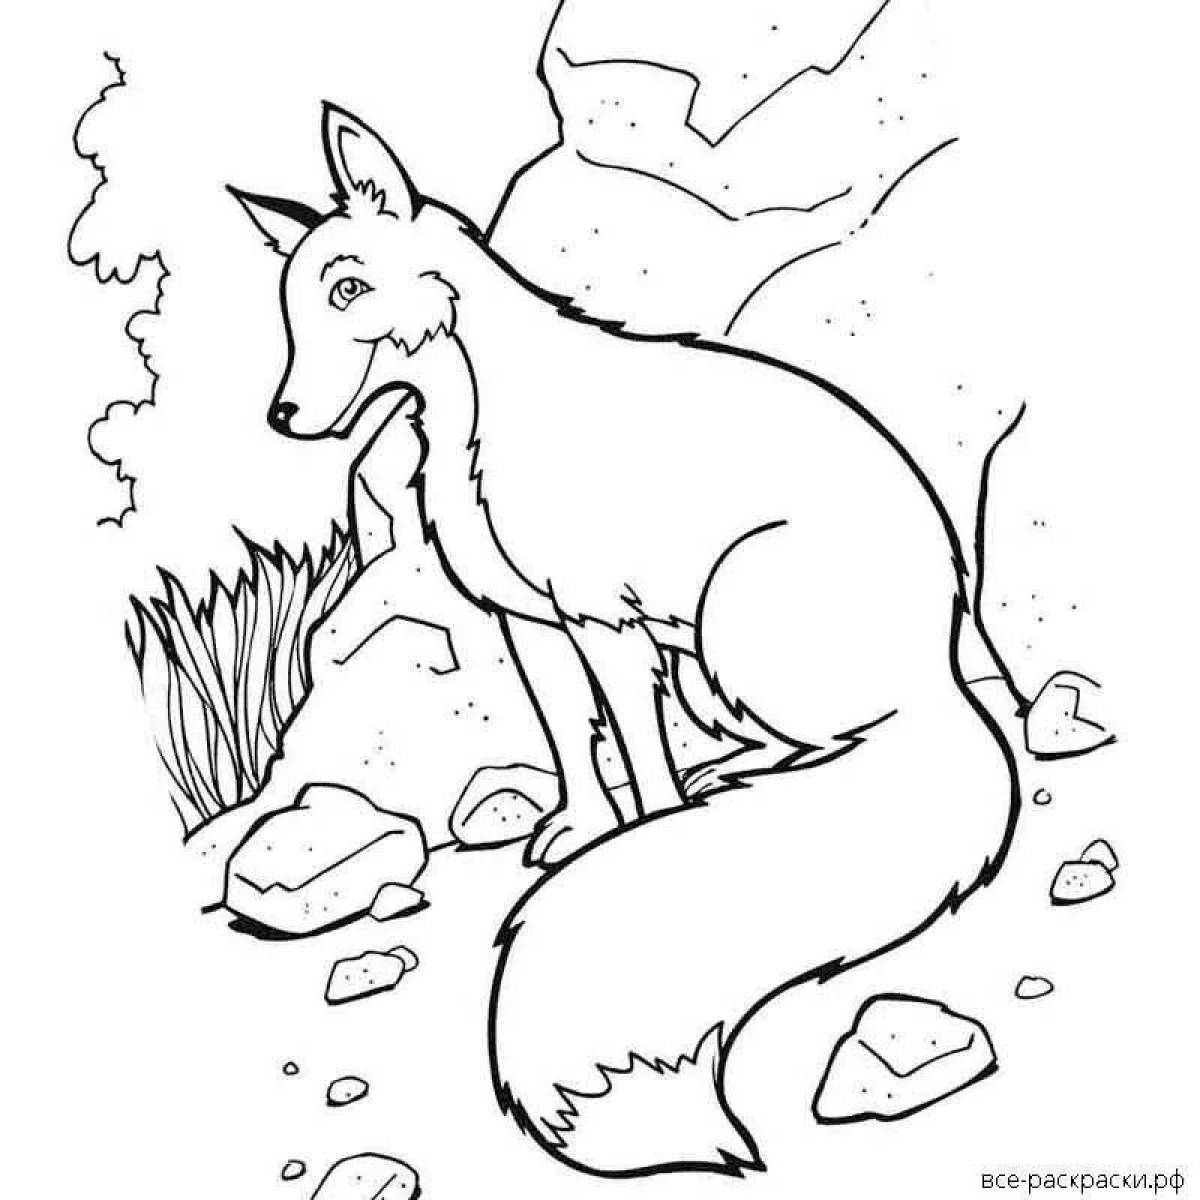 Coloring page serendipitous fox in winter